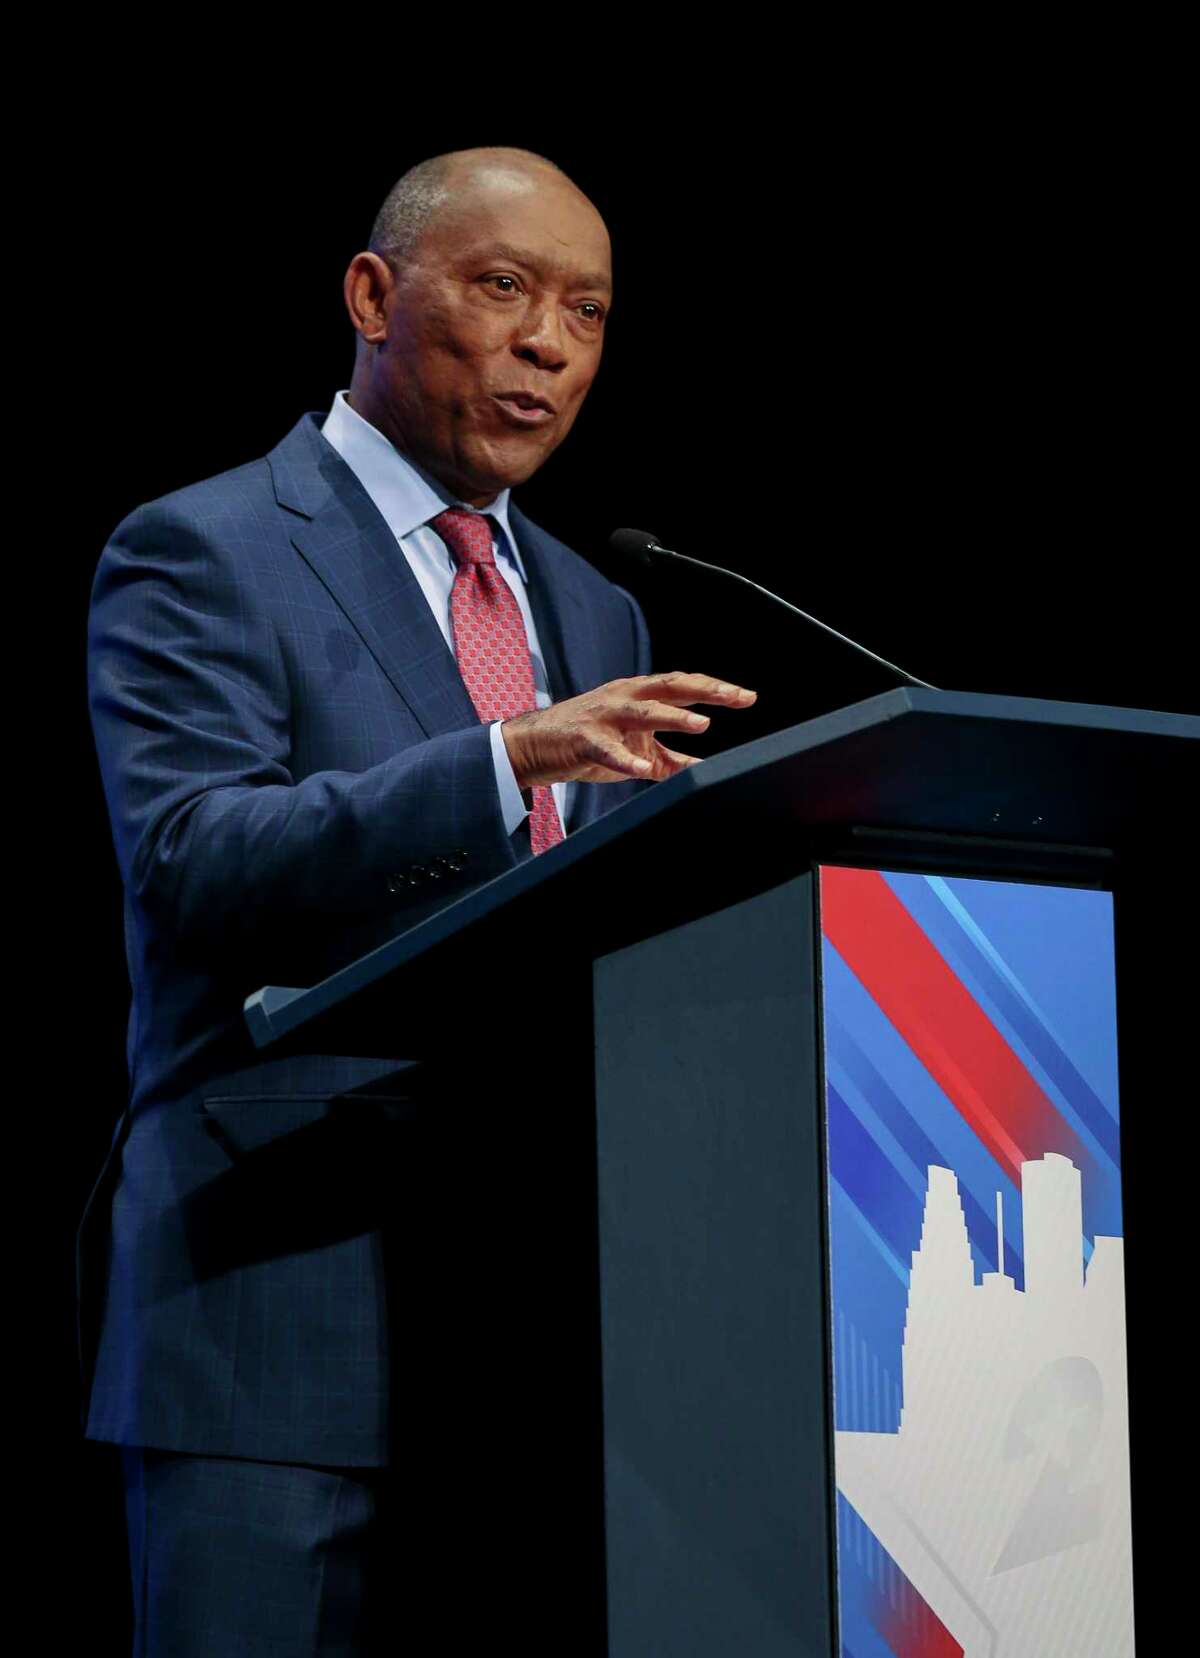 Mayor Sylvester Turner answers a question during the mayoral debate at the Morris Cultural Arts Center at Houston Baptist University Friday, Oct. 11, 2019, in Houston.